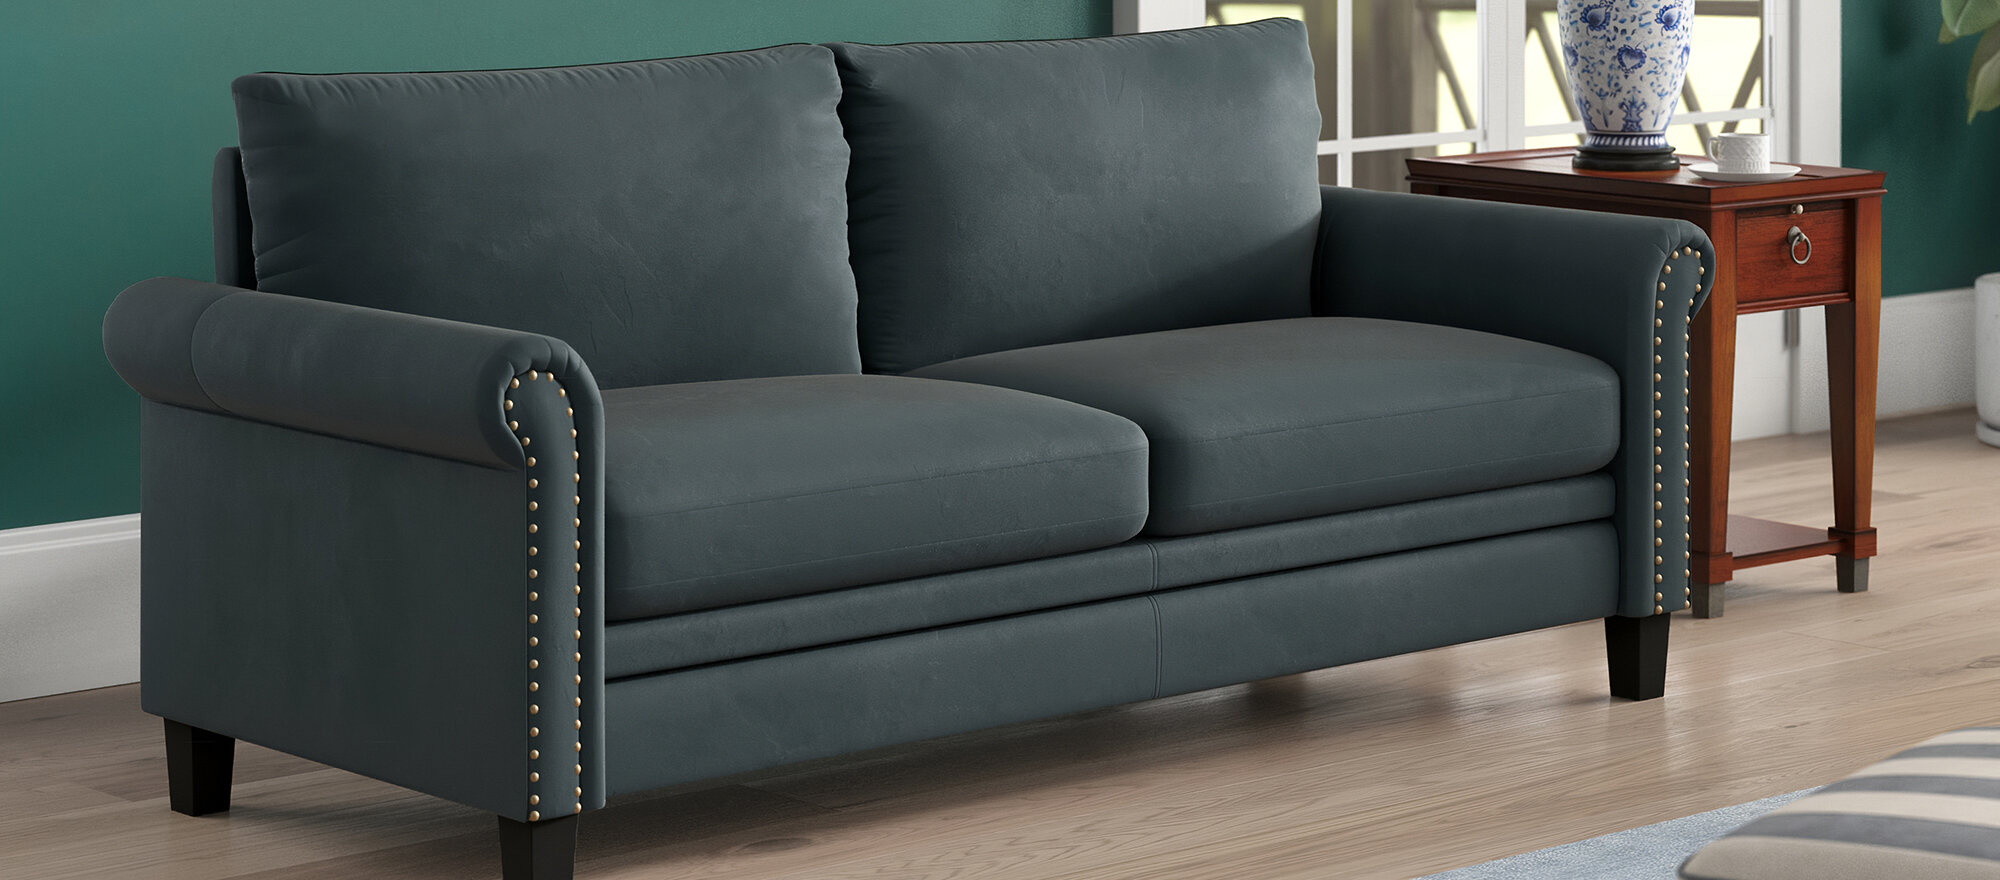 Recliners%2C Sofas%2C And More 